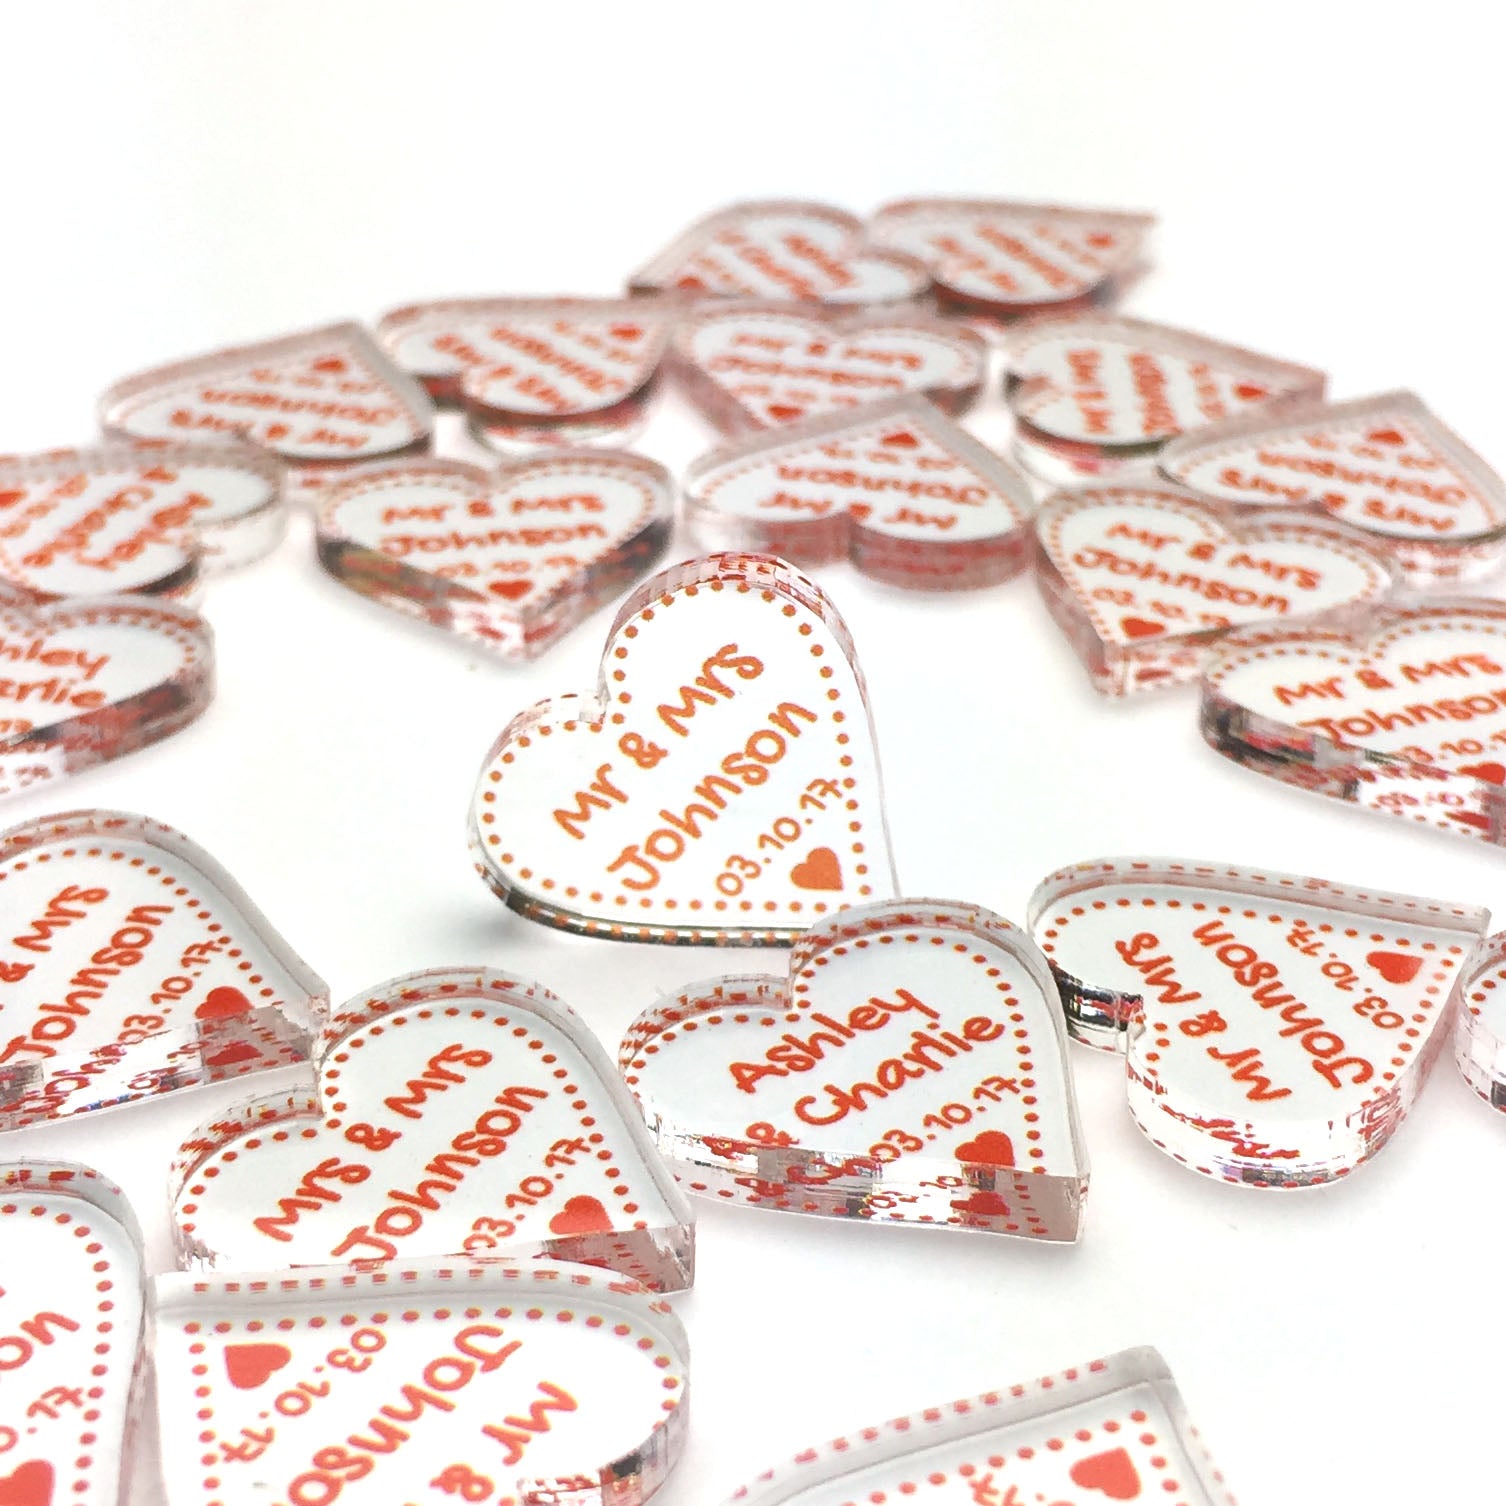 Personalised Wedding Favours - Clear Acrylic + Terracotta Red Acrylic Love Hearts